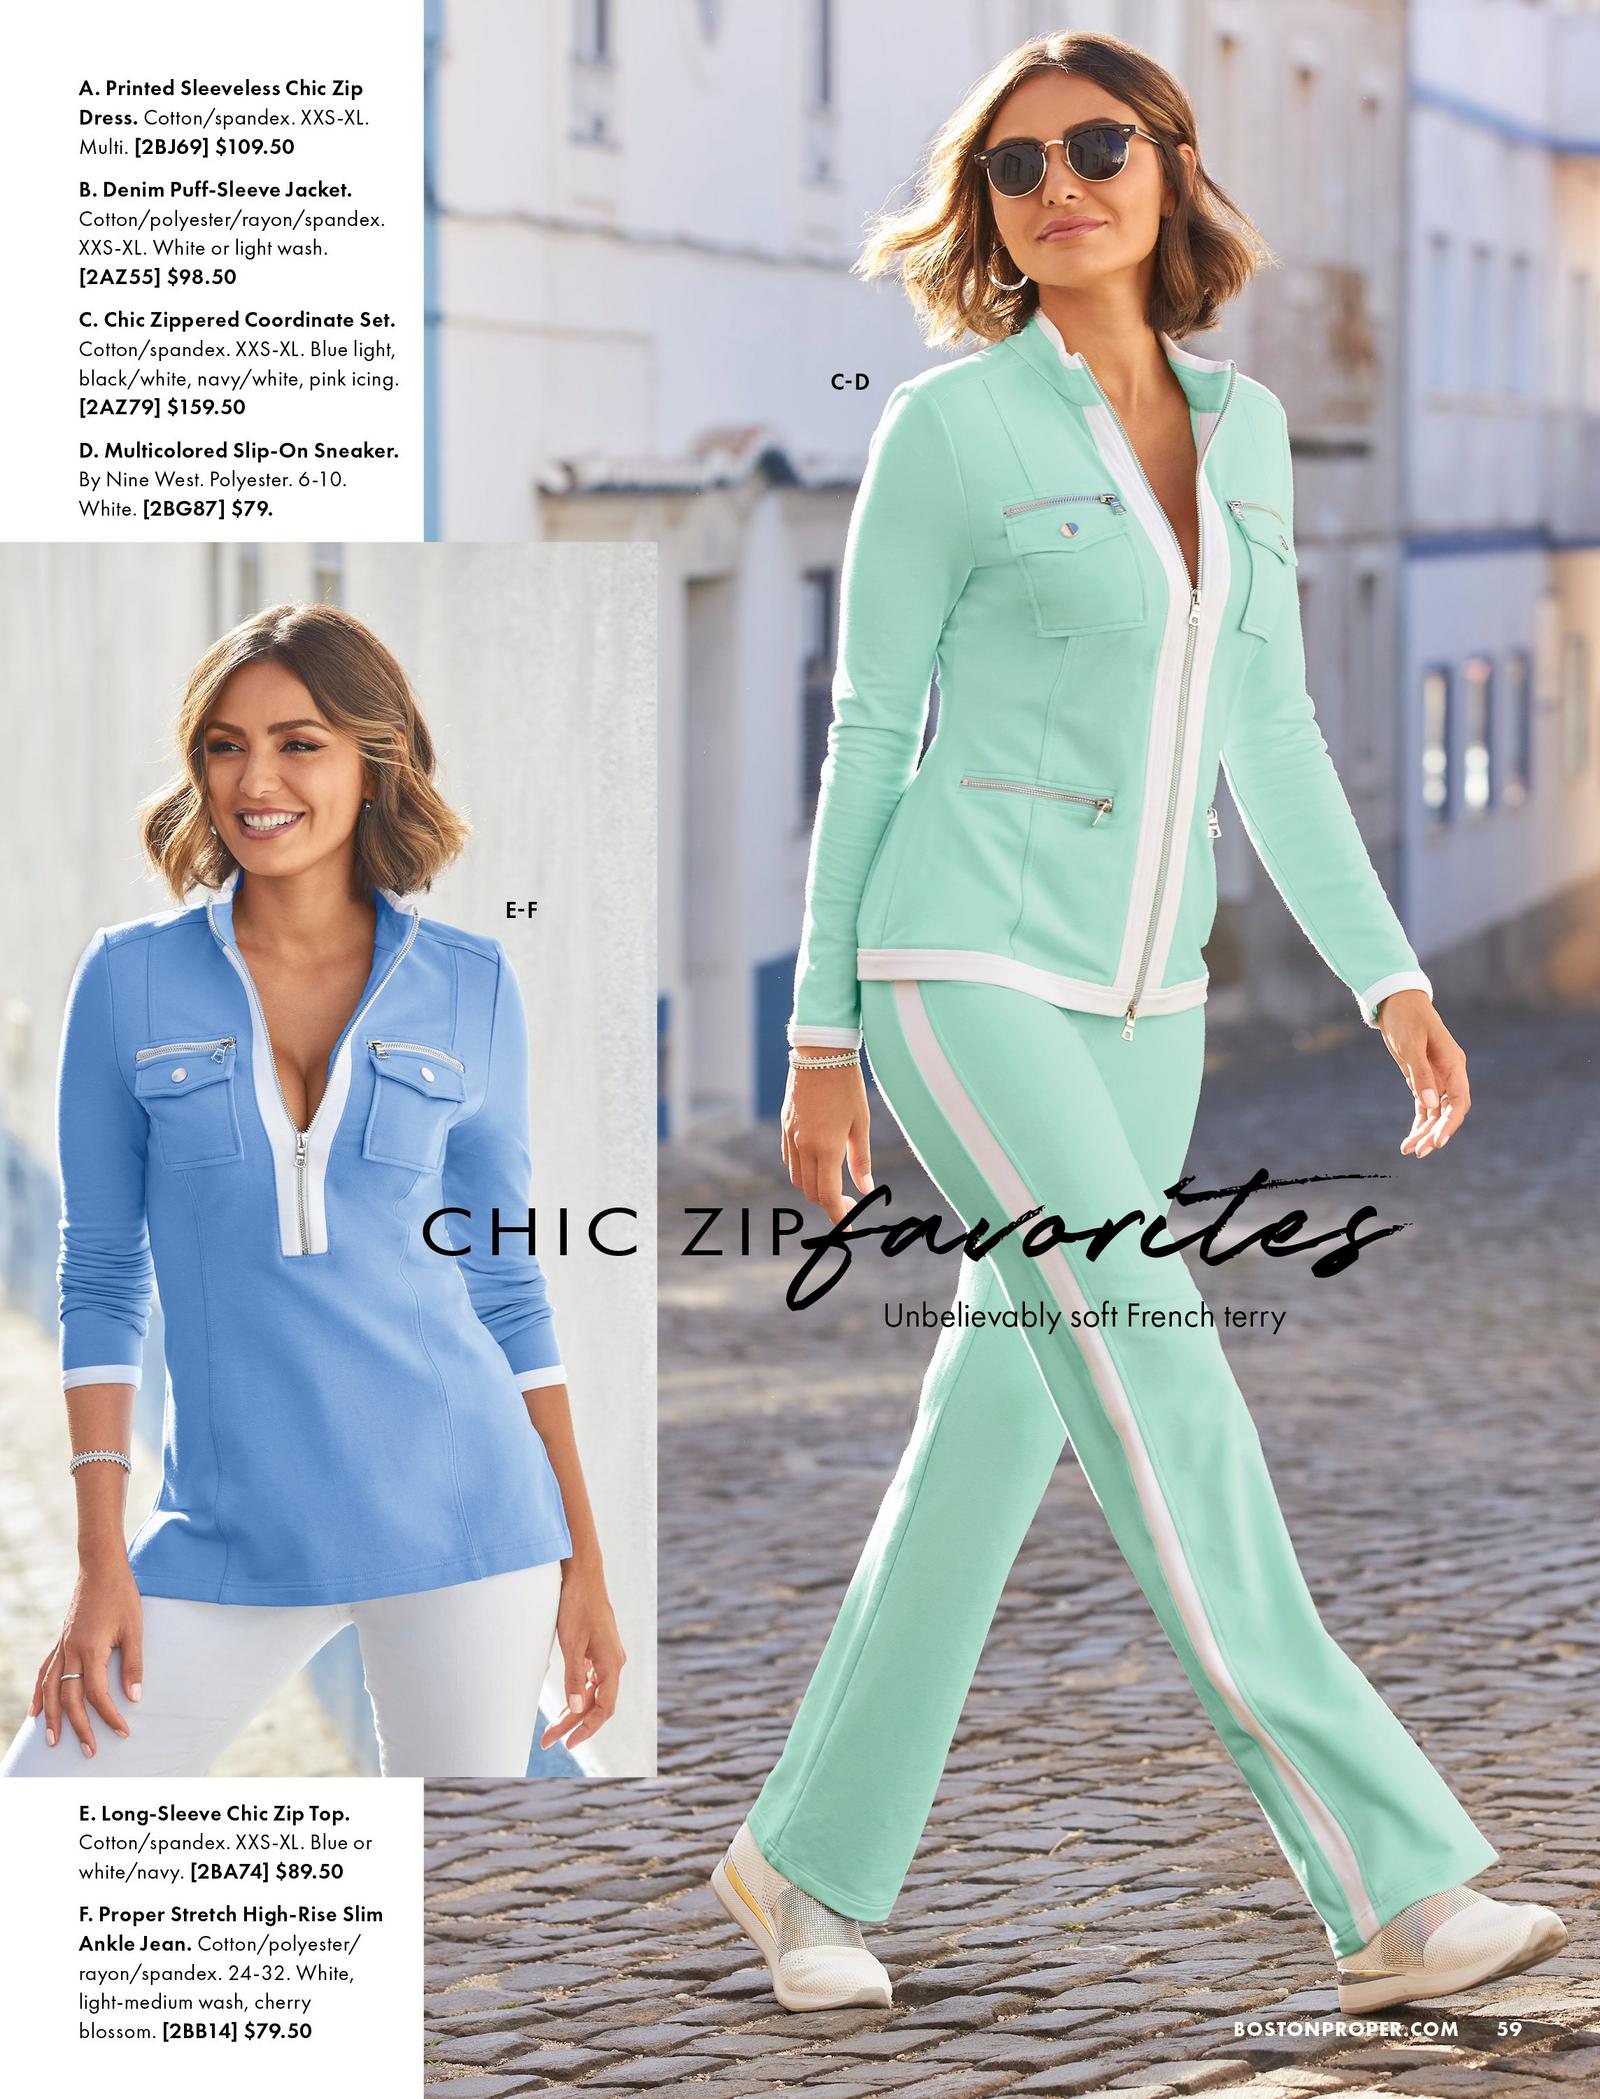 left model wearing a periwinkle chic zip long-sleeve top and white pants. right model wearing a mint two-piece chic-zip set, sunglasses, and white sneakers.